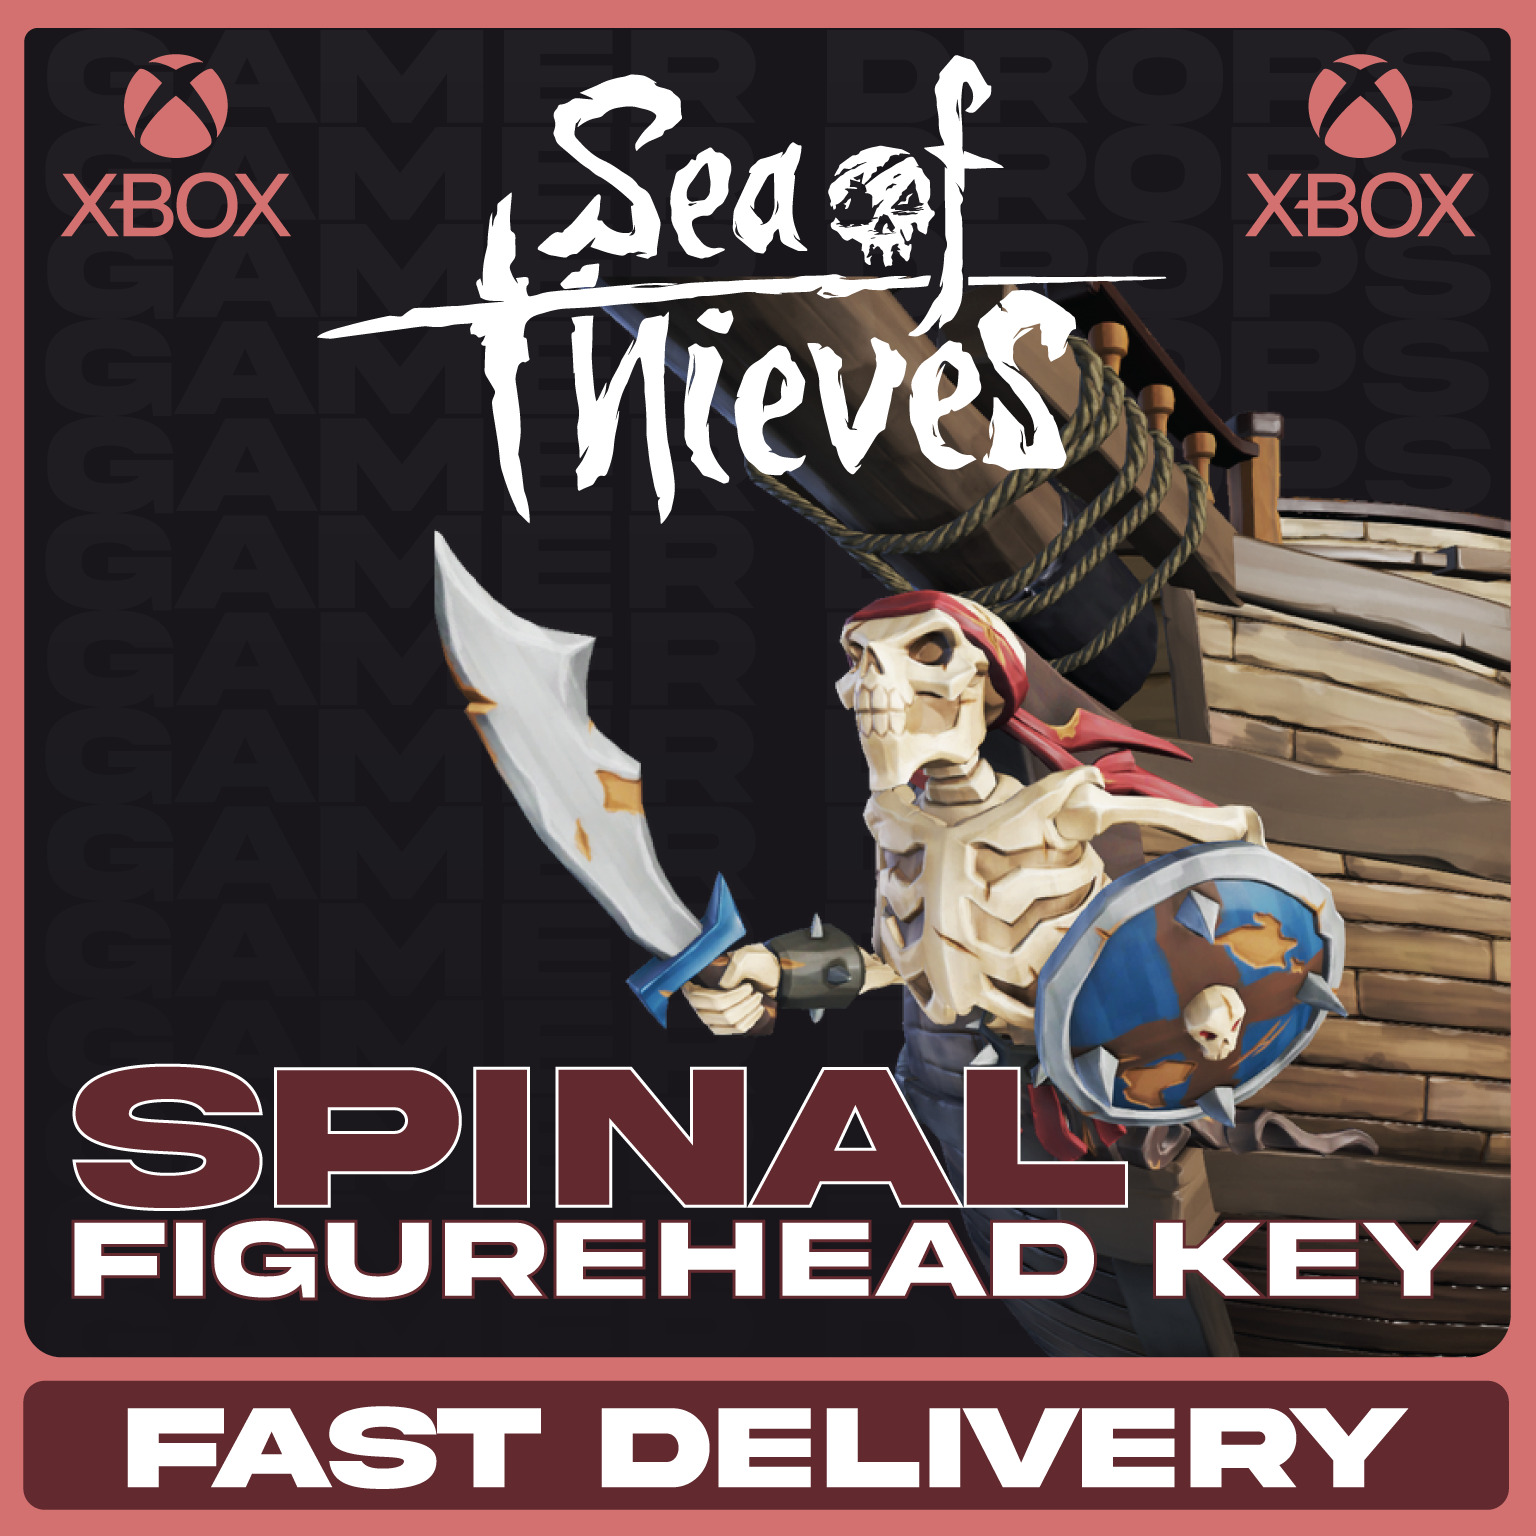 Sea Of Thieves - Spinal Figurehead - XBOX ONLY - GLOBAL CODE ✅ EXTREMELY RARE ✅